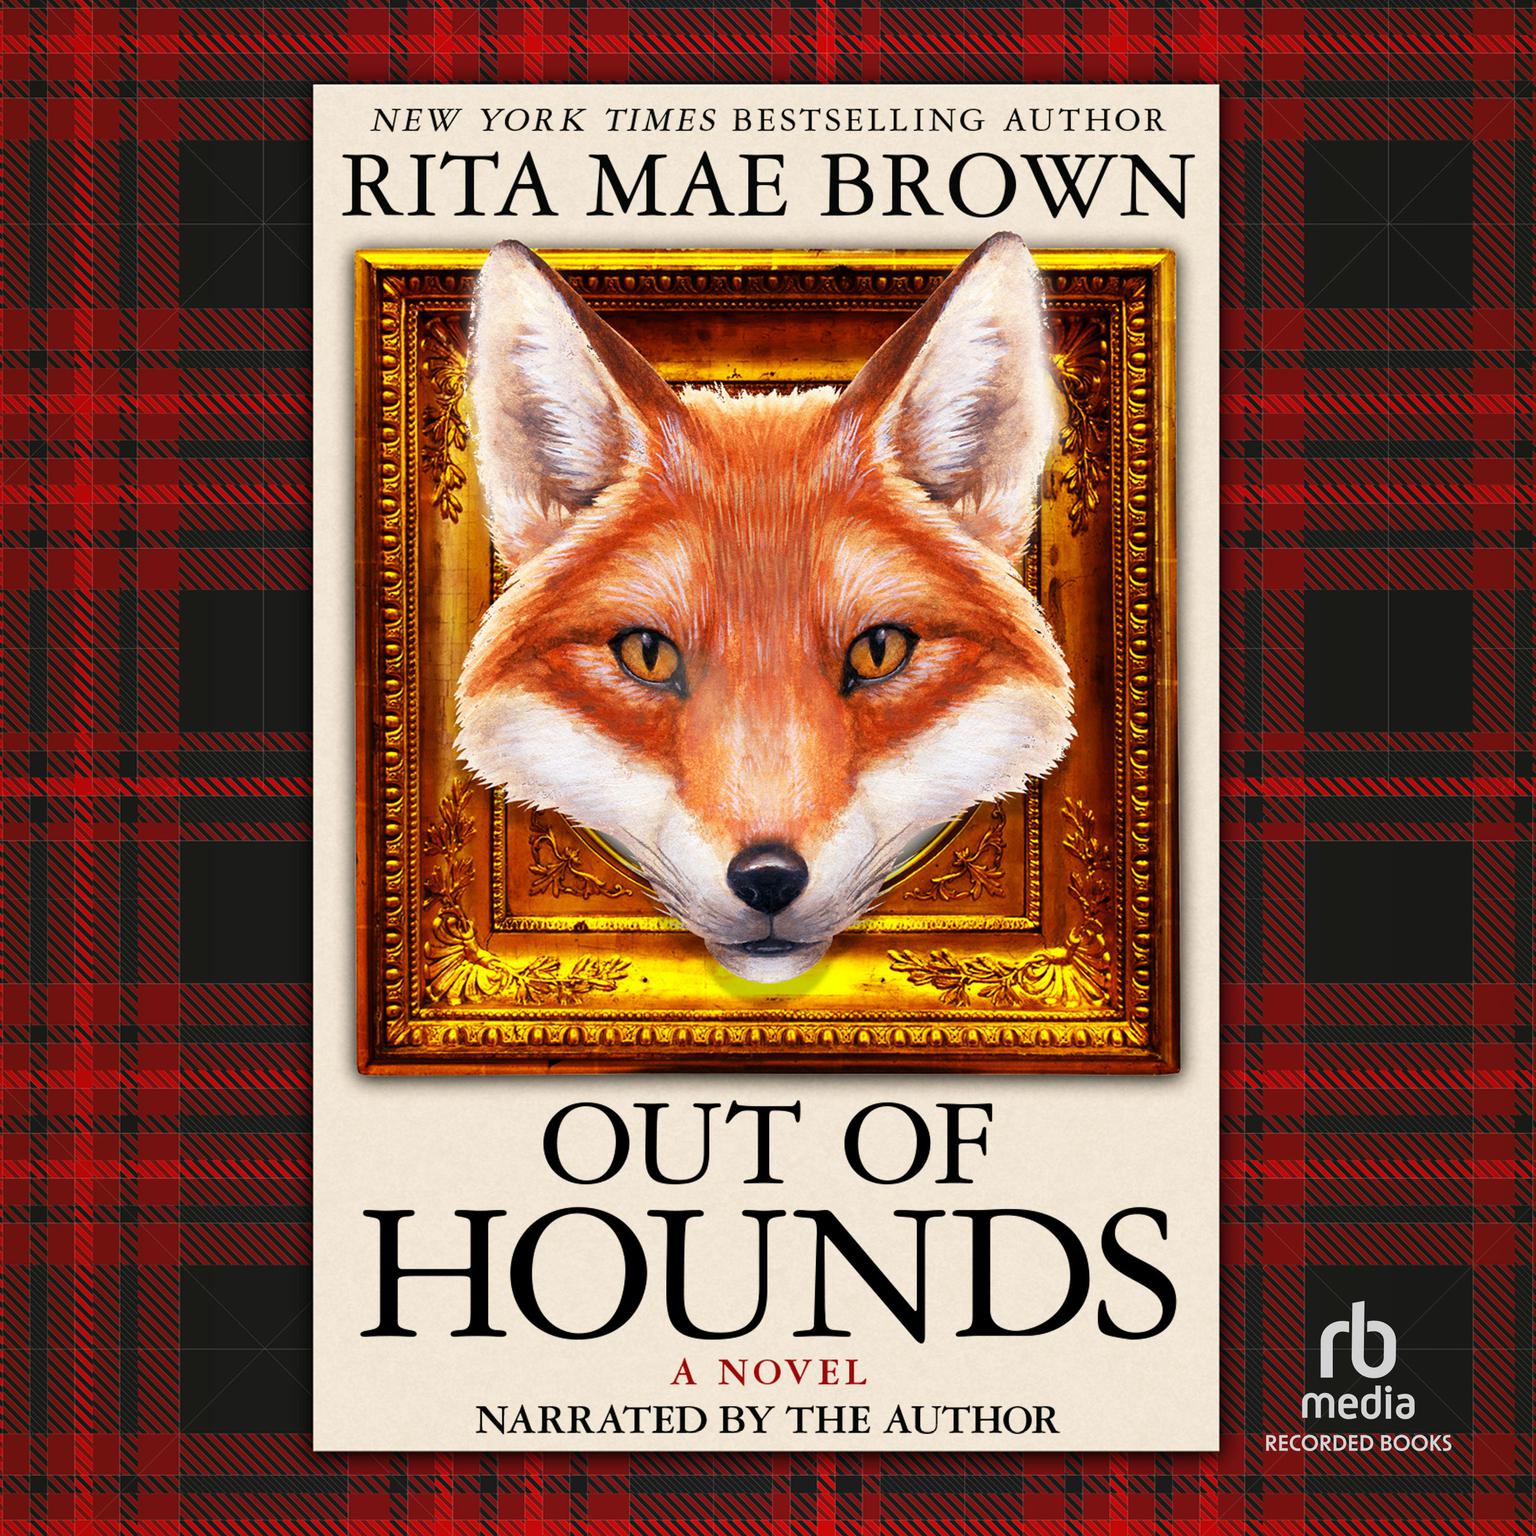 Out of Hounds: A Novel Audiobook, by Rita Mae Brown